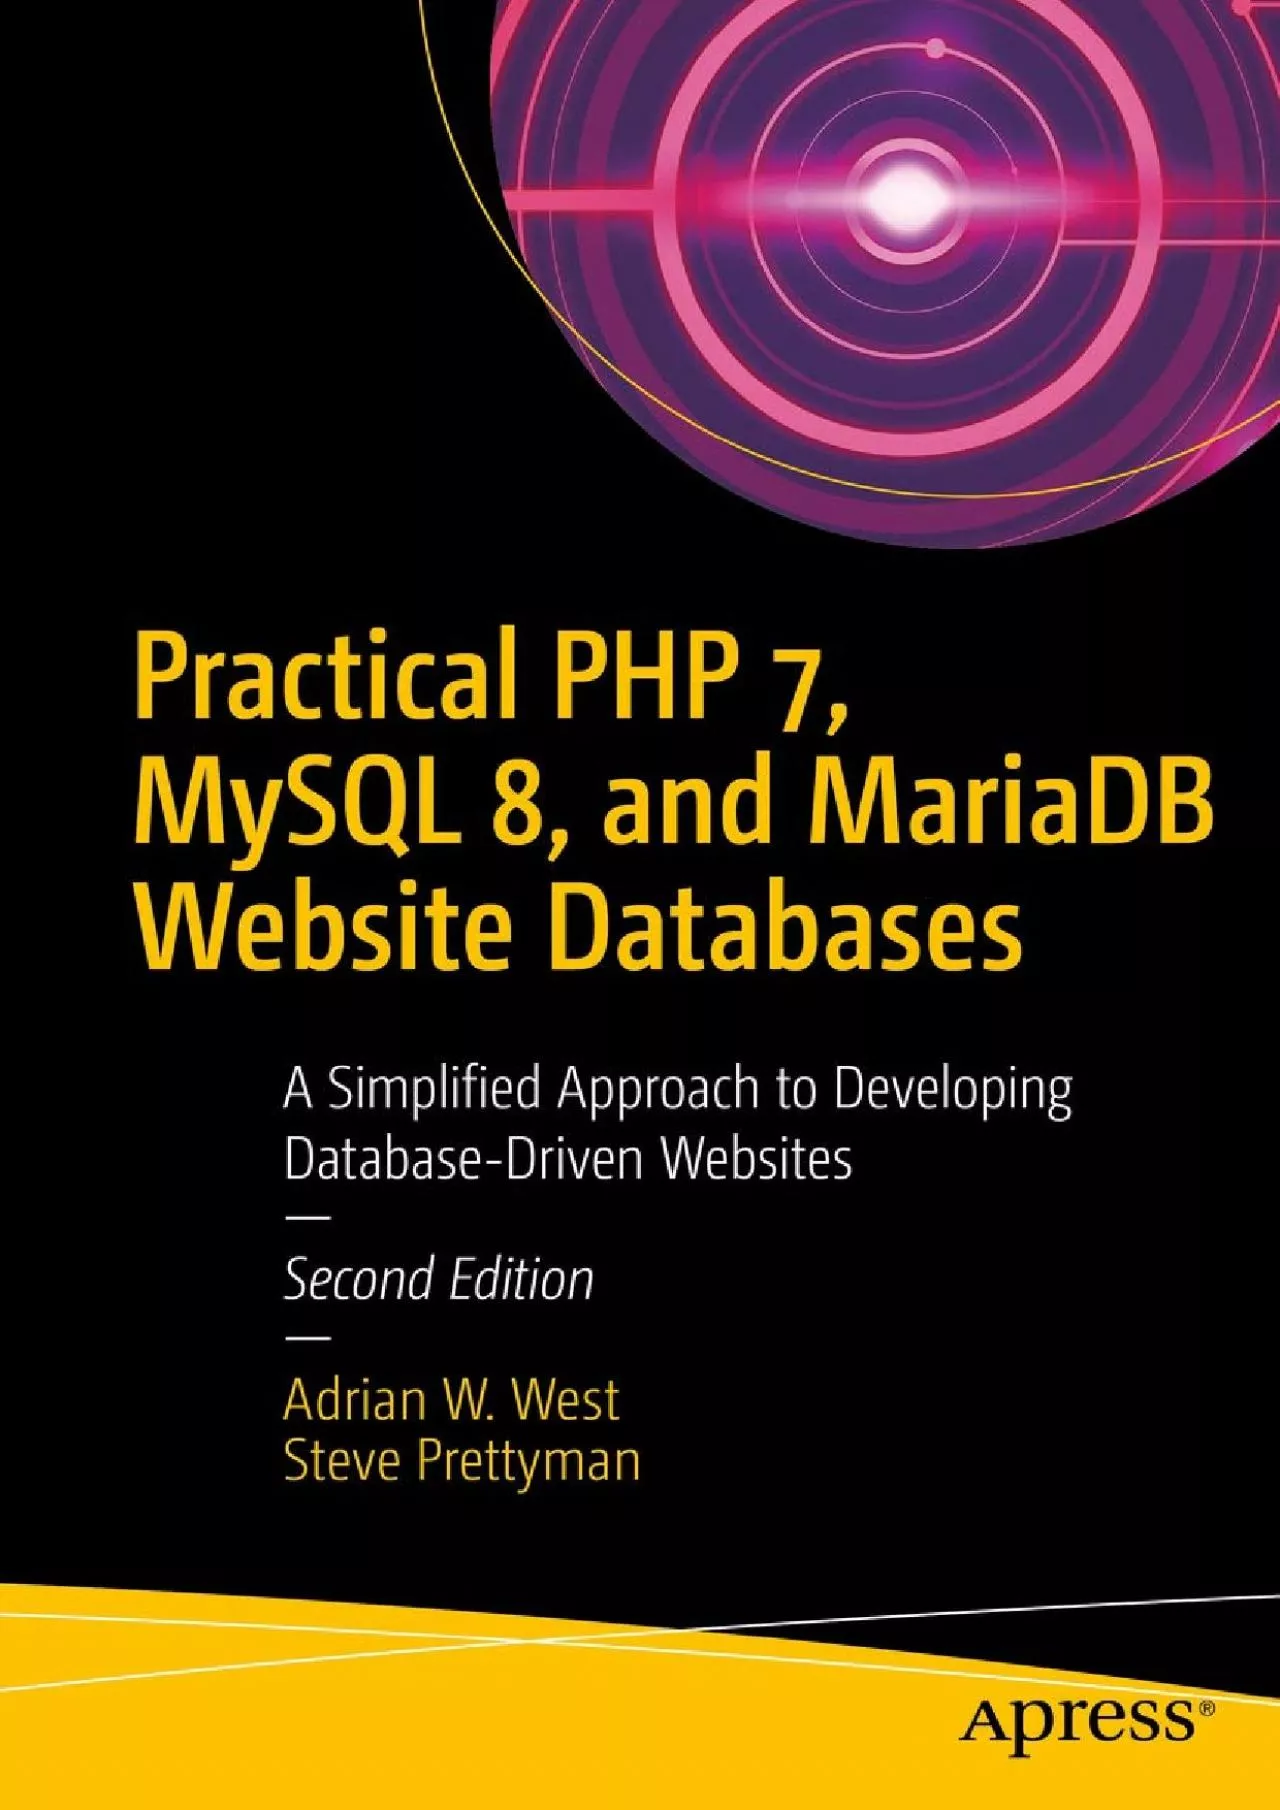 [READING BOOK]-Practical PHP 7, MySQL 8, and MariaDB Website Databases: A Simplified Approach